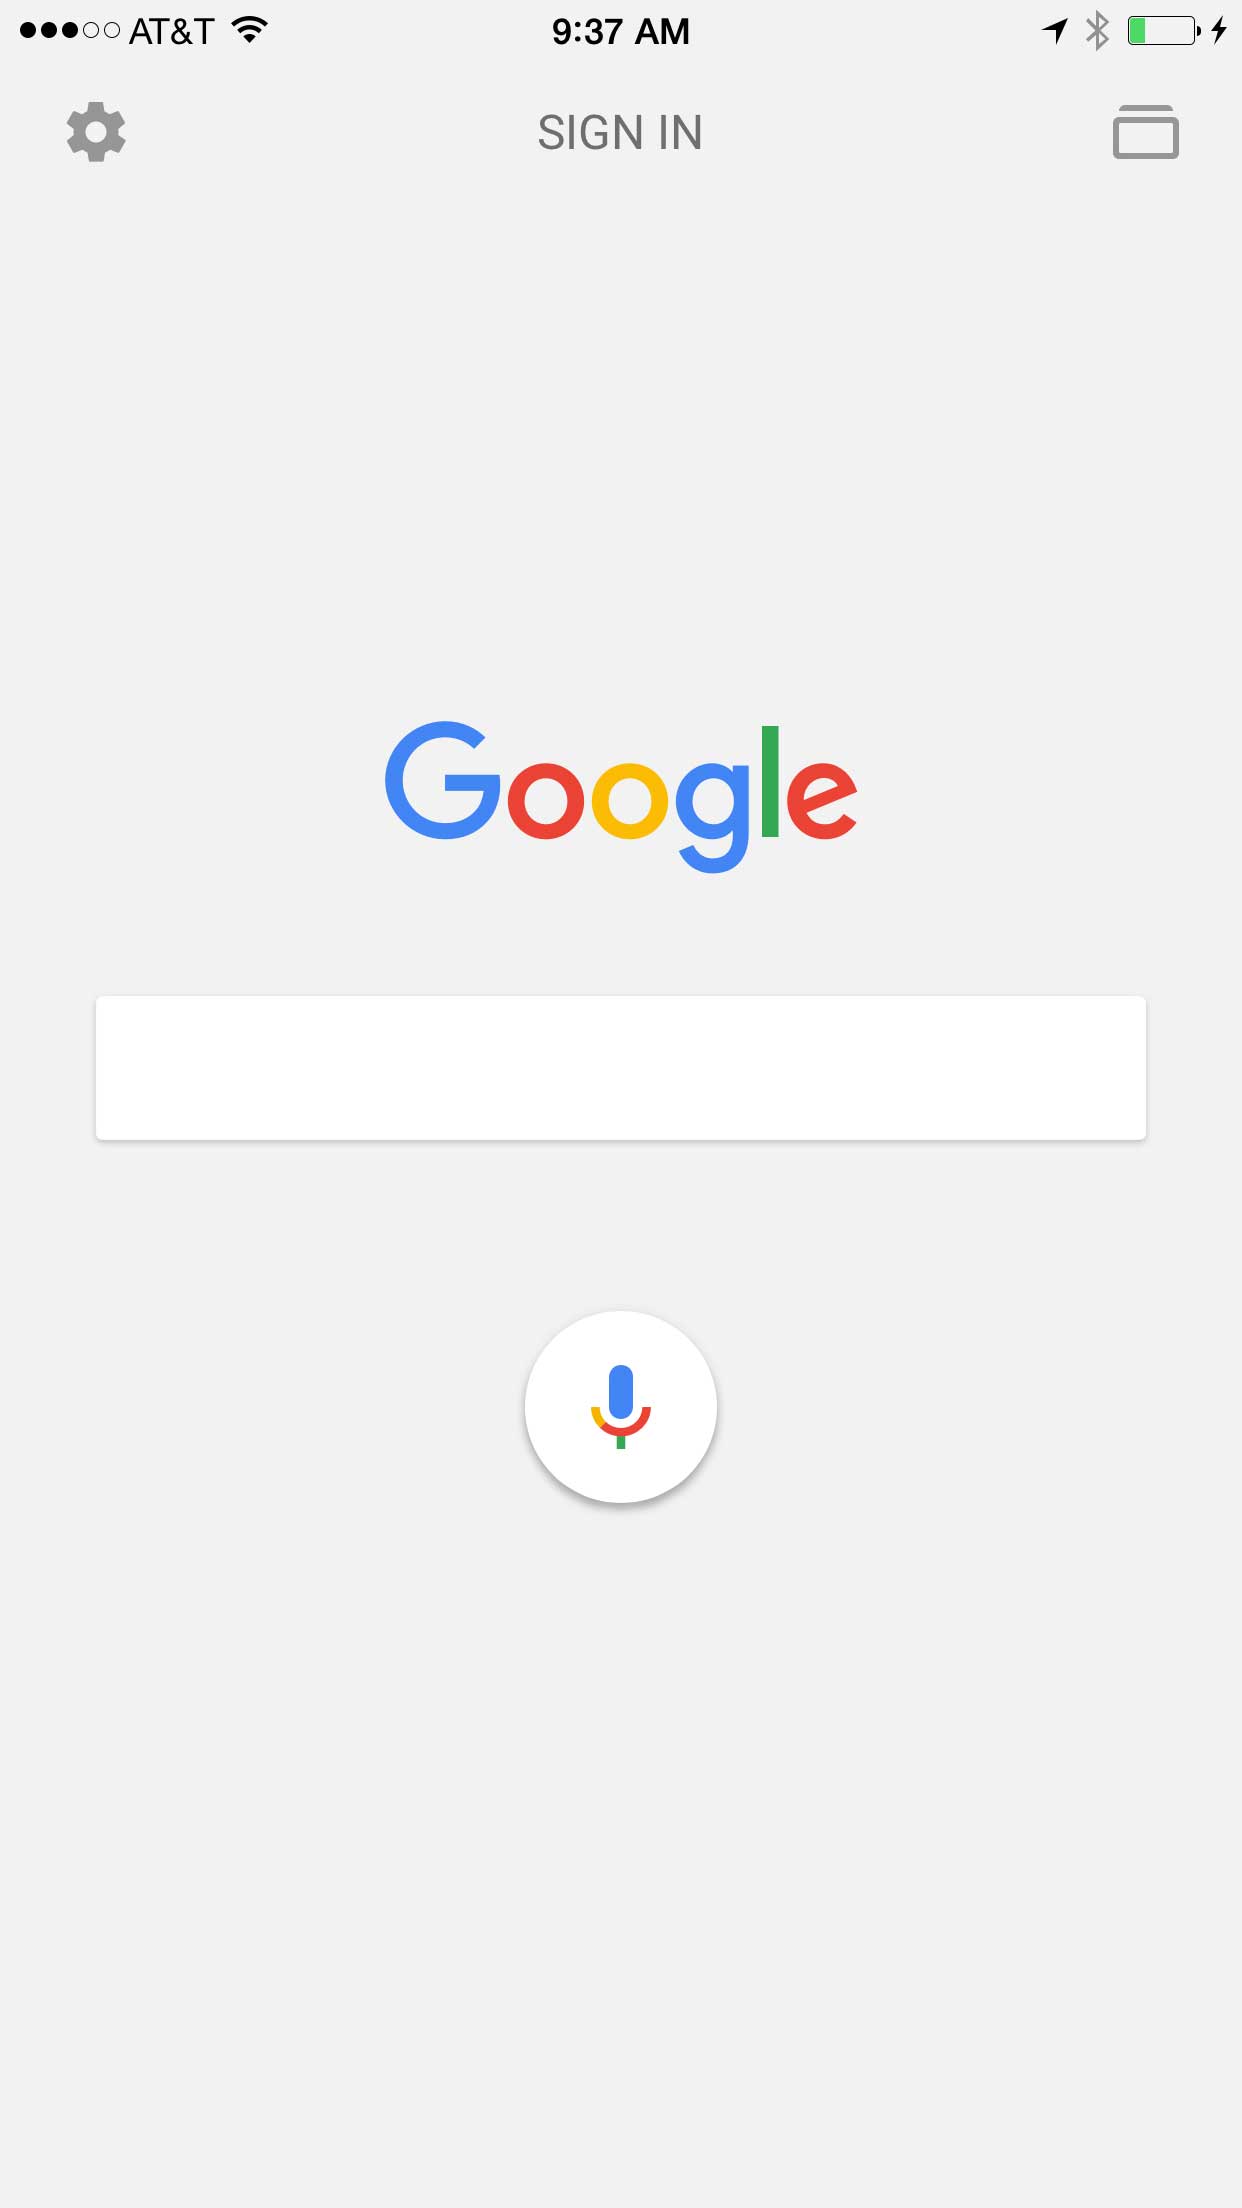 The Google search app